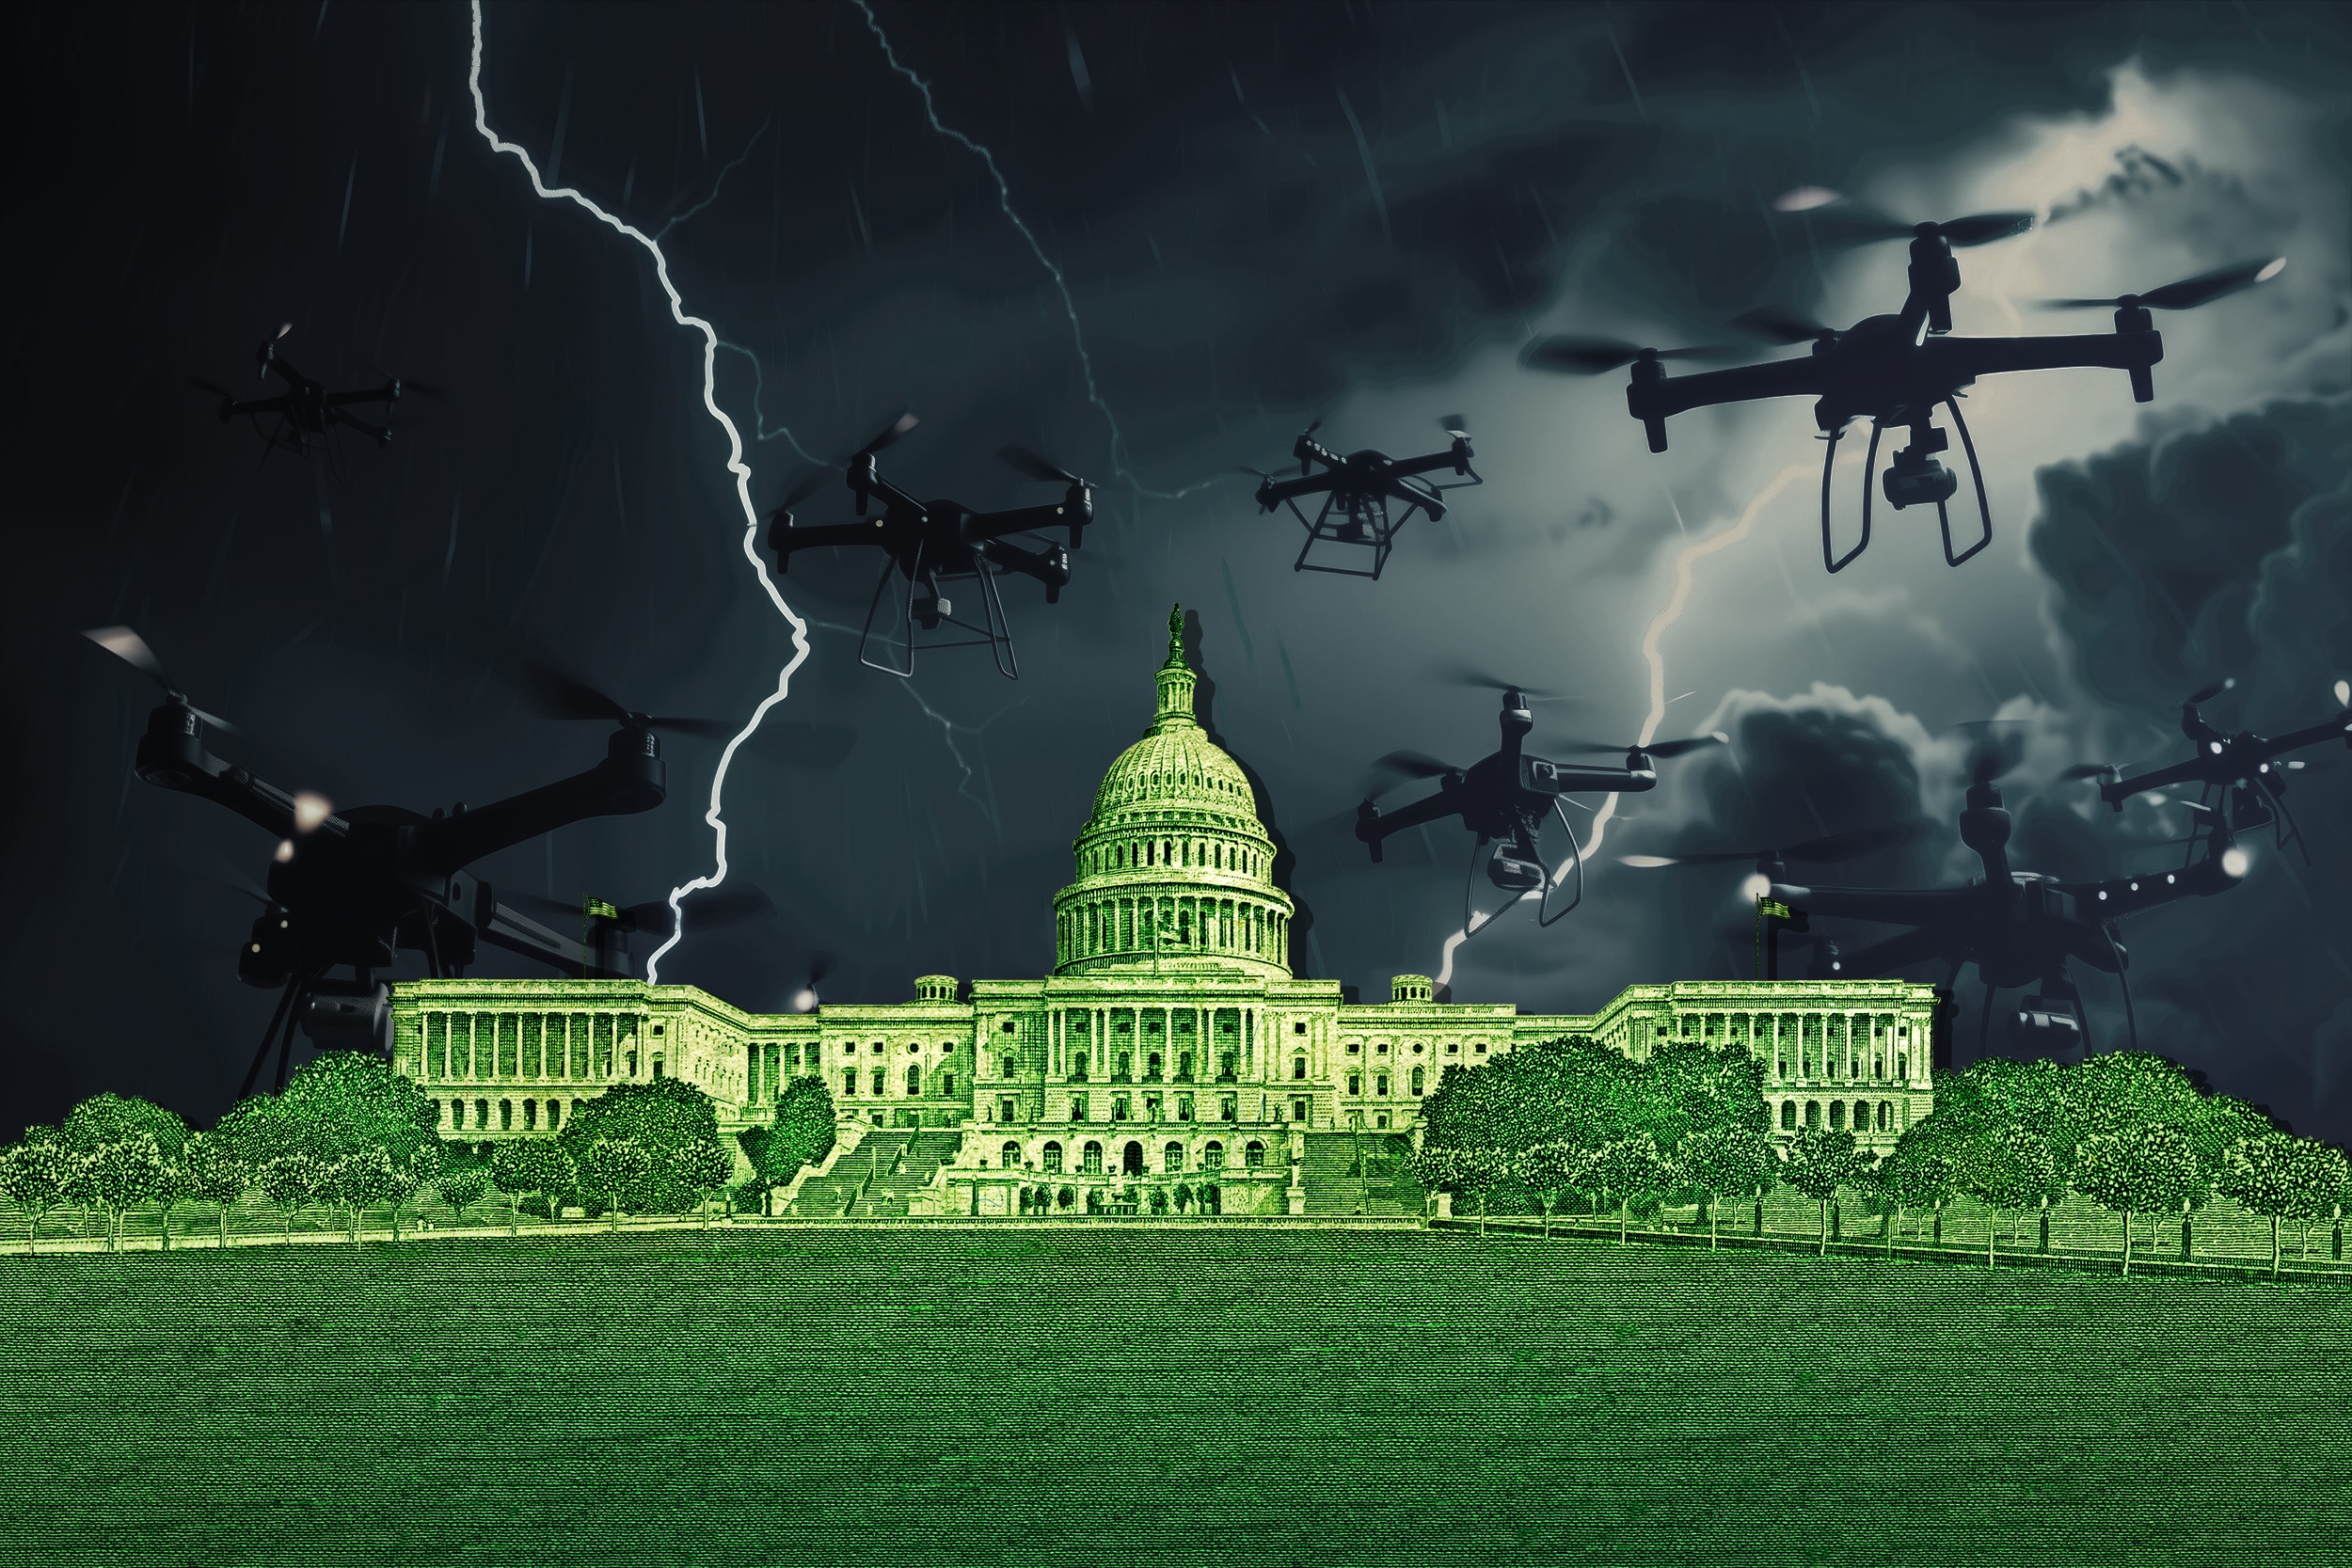 A dramatic depiction of drones flying over the U.S. Capitol building during a stormy night, highlighting the controversy surrounding the DJI drone ban.